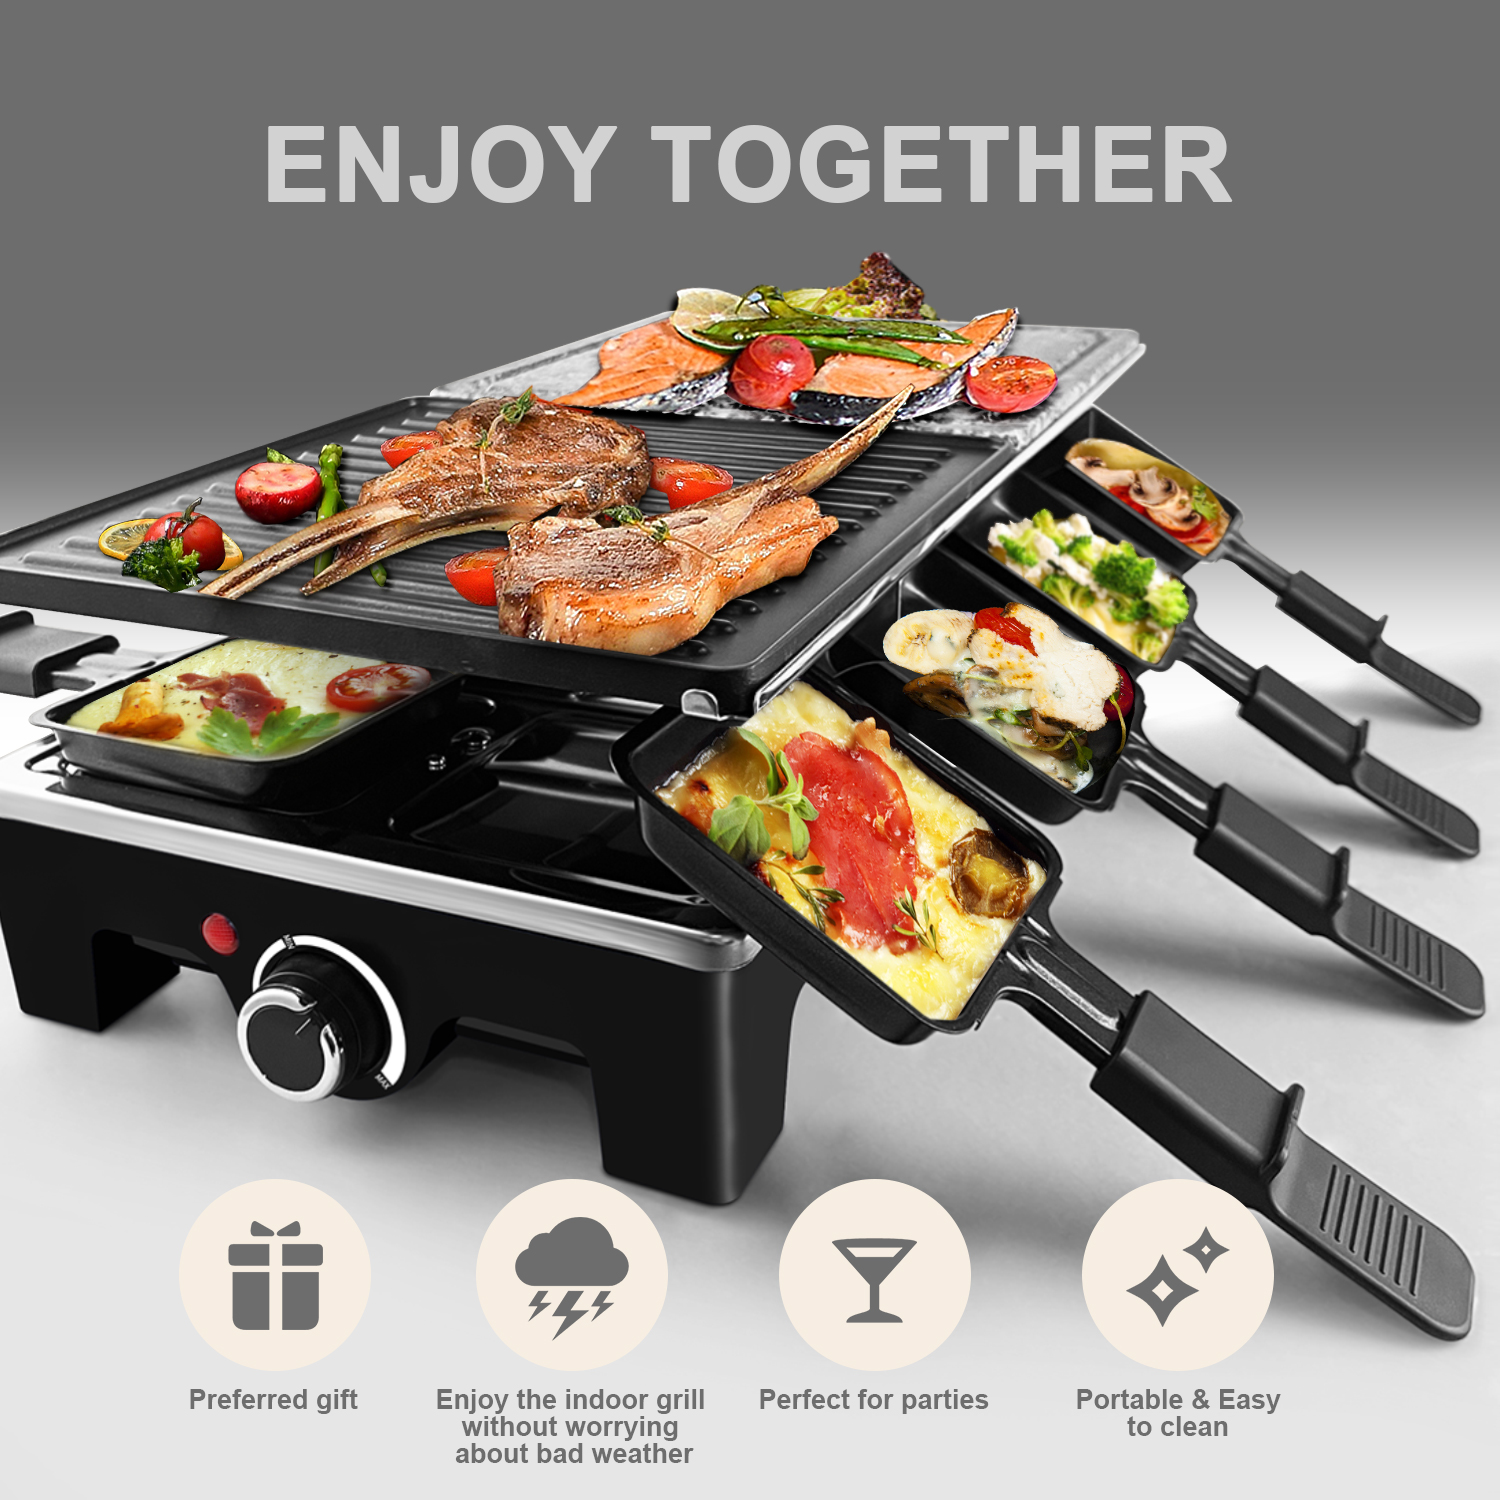 CUSIMAX Raclette Grill Electric Grill Table, Portable 2 in 1 Korean BBQ  Grill Indoor & Cheese Ractlette, Reversible Non-stick plate, Crepe Maker  with Adjustable temperature control and 8 Paddles 